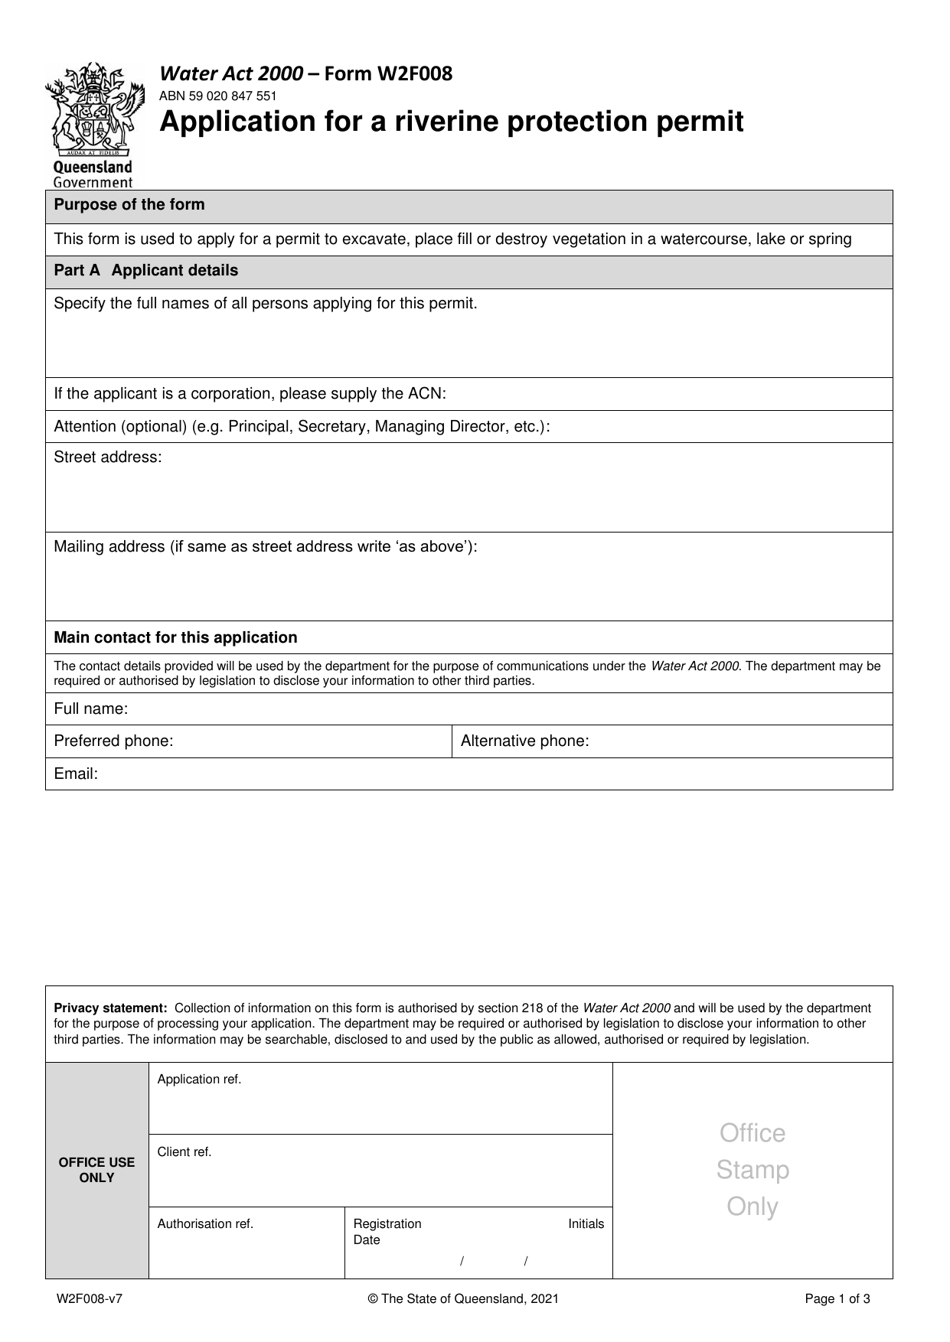 Form W2F008 Application for a Riverine Protection Permit - Queensland, Australia, Page 1